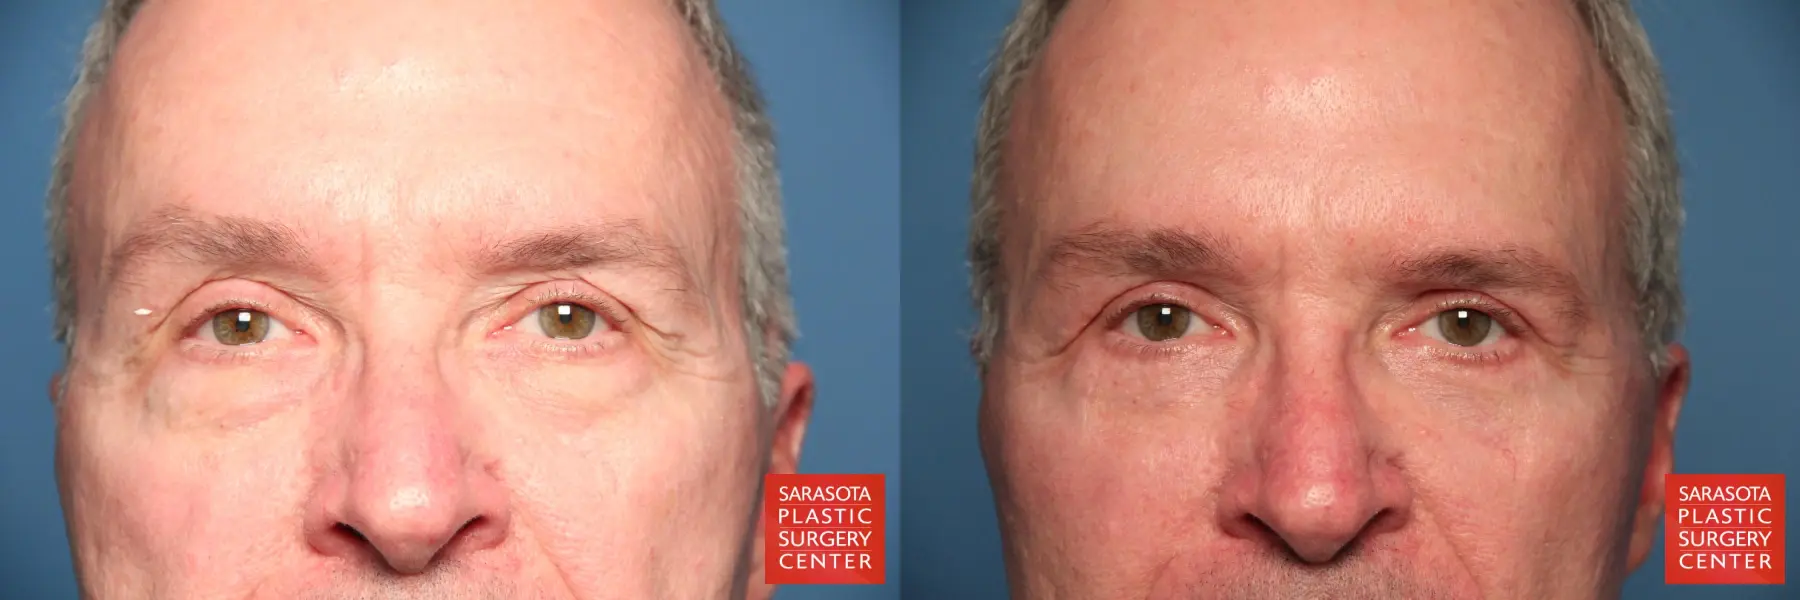 Eyelid Lift For Men Revision: Patient 1 - Before and After 1